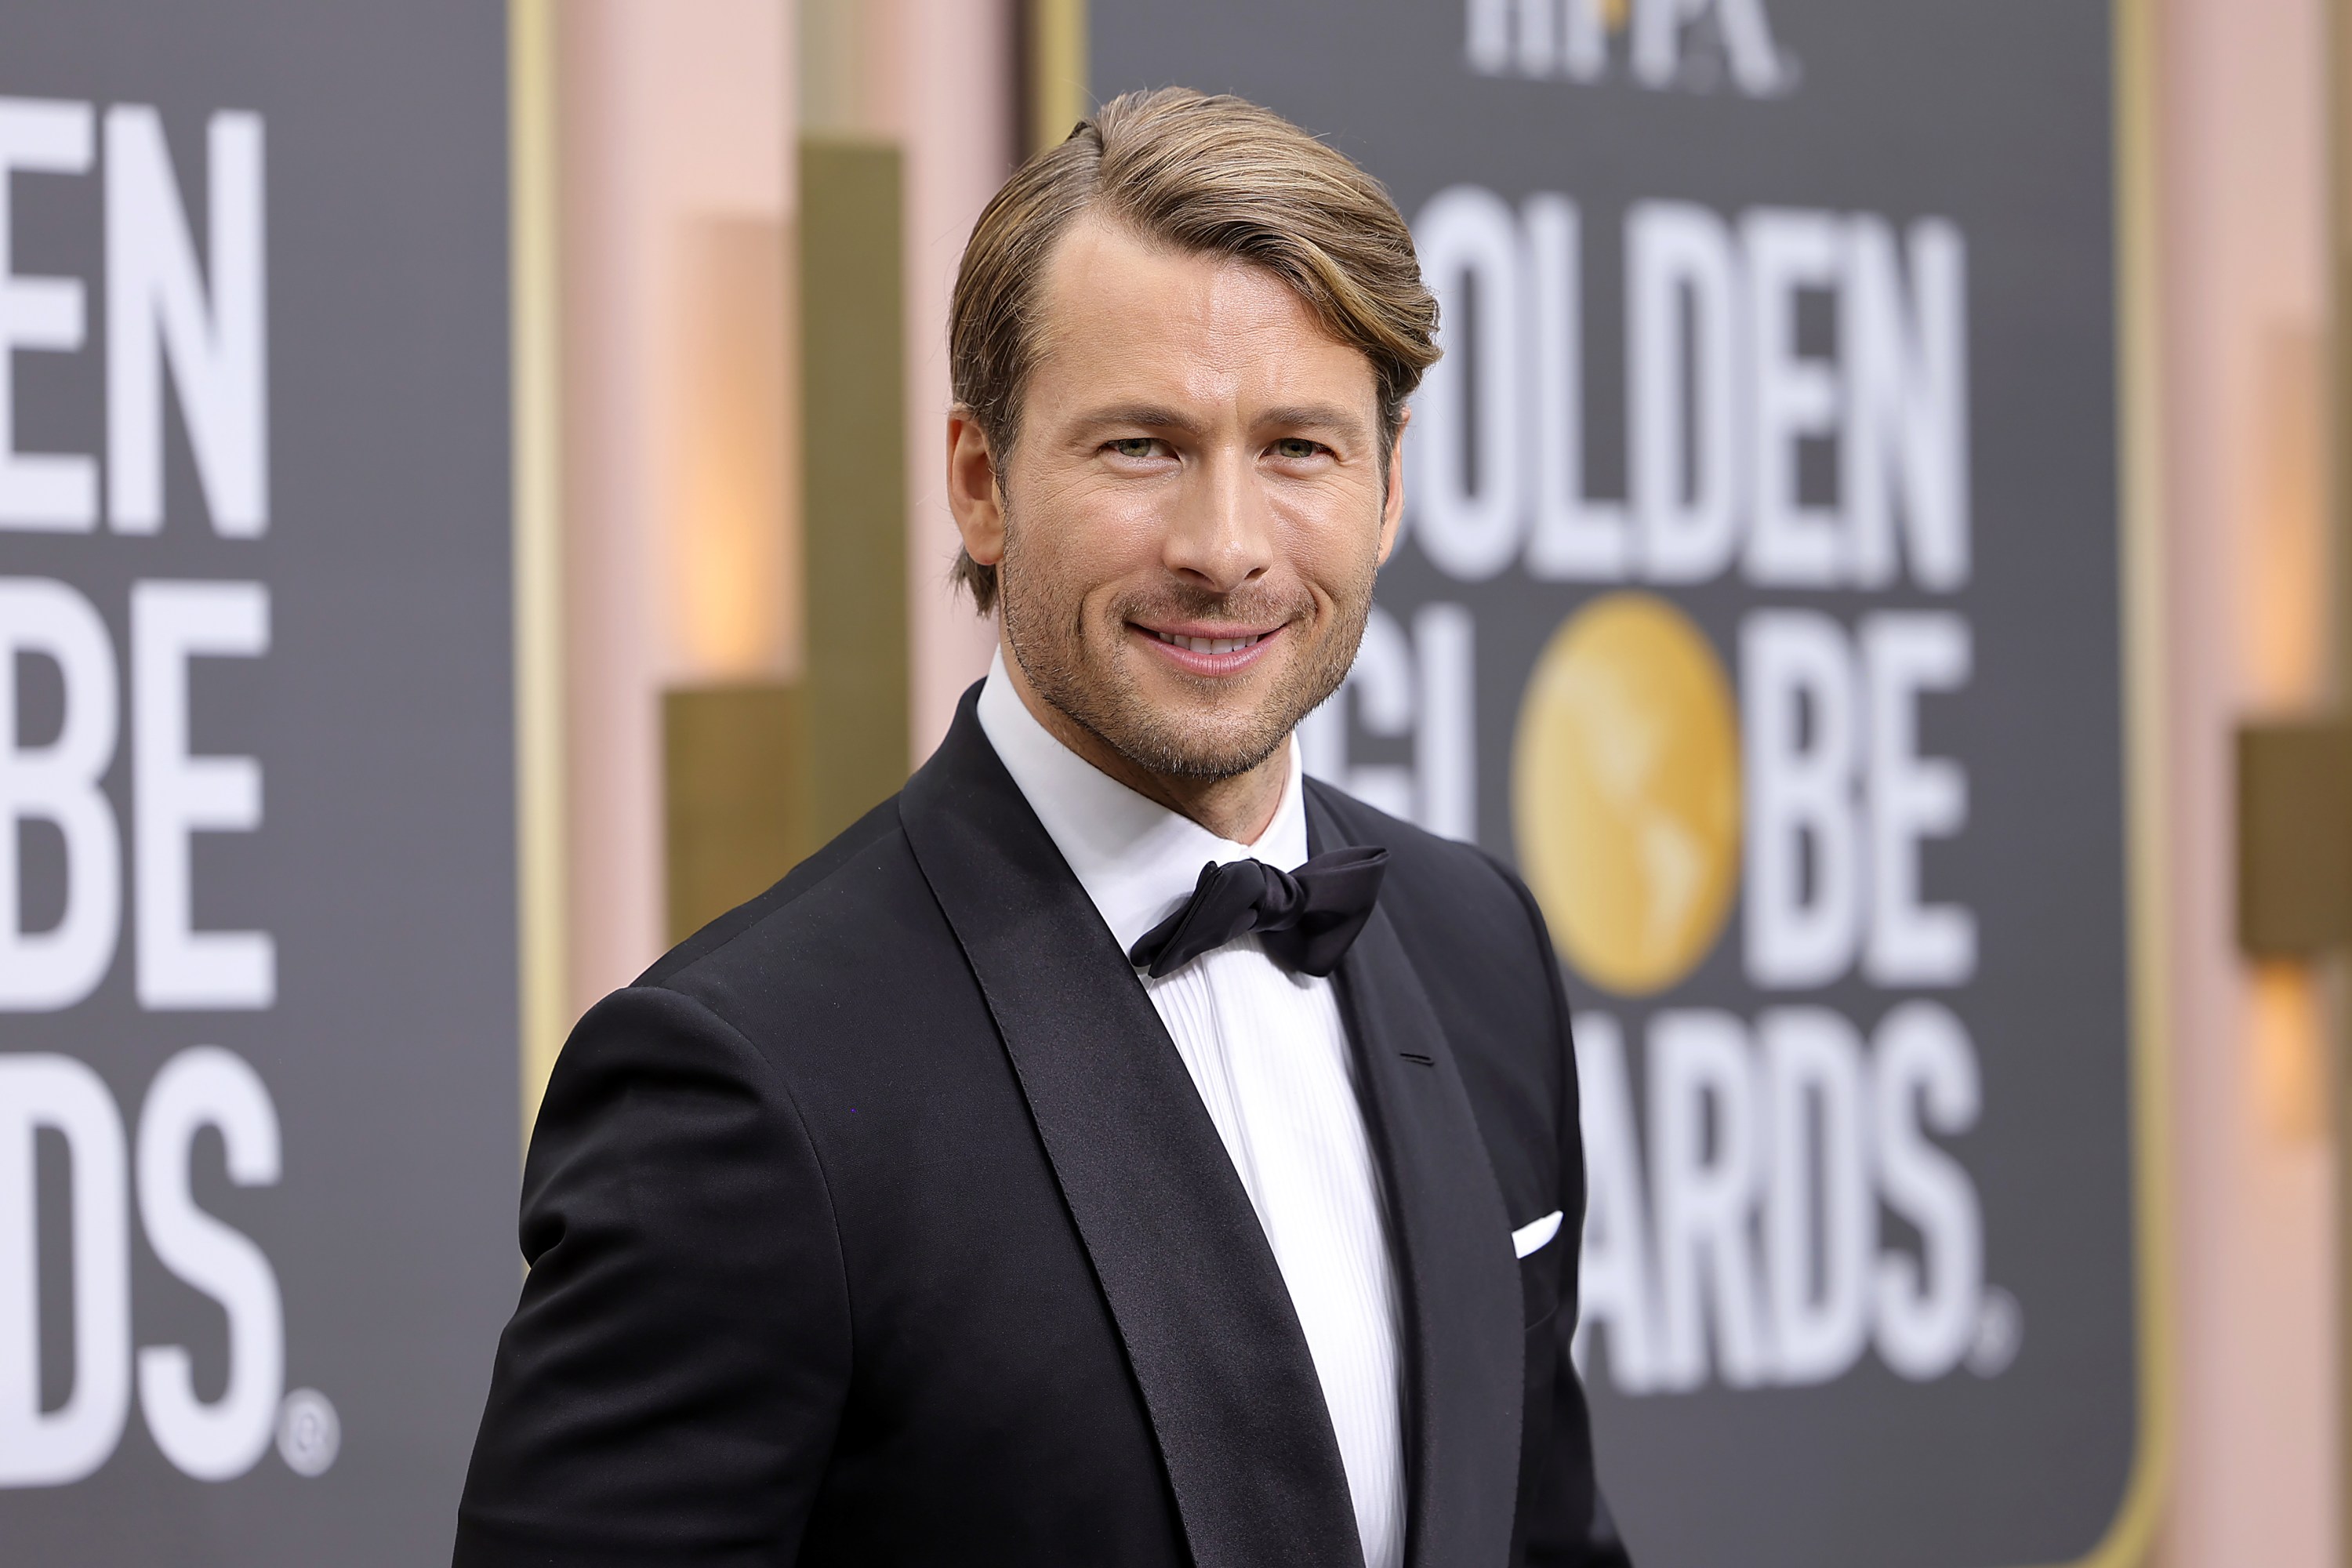 BEVERLY HILLS, CALIFORNIA - JANUARY 10: Glen Powell attends the 80th Annual Golden Globe Awards at The Beverly Hilton on January 10, 2023 in Beverly Hills, California. (Photo by Amy Sussman/Getty Images)